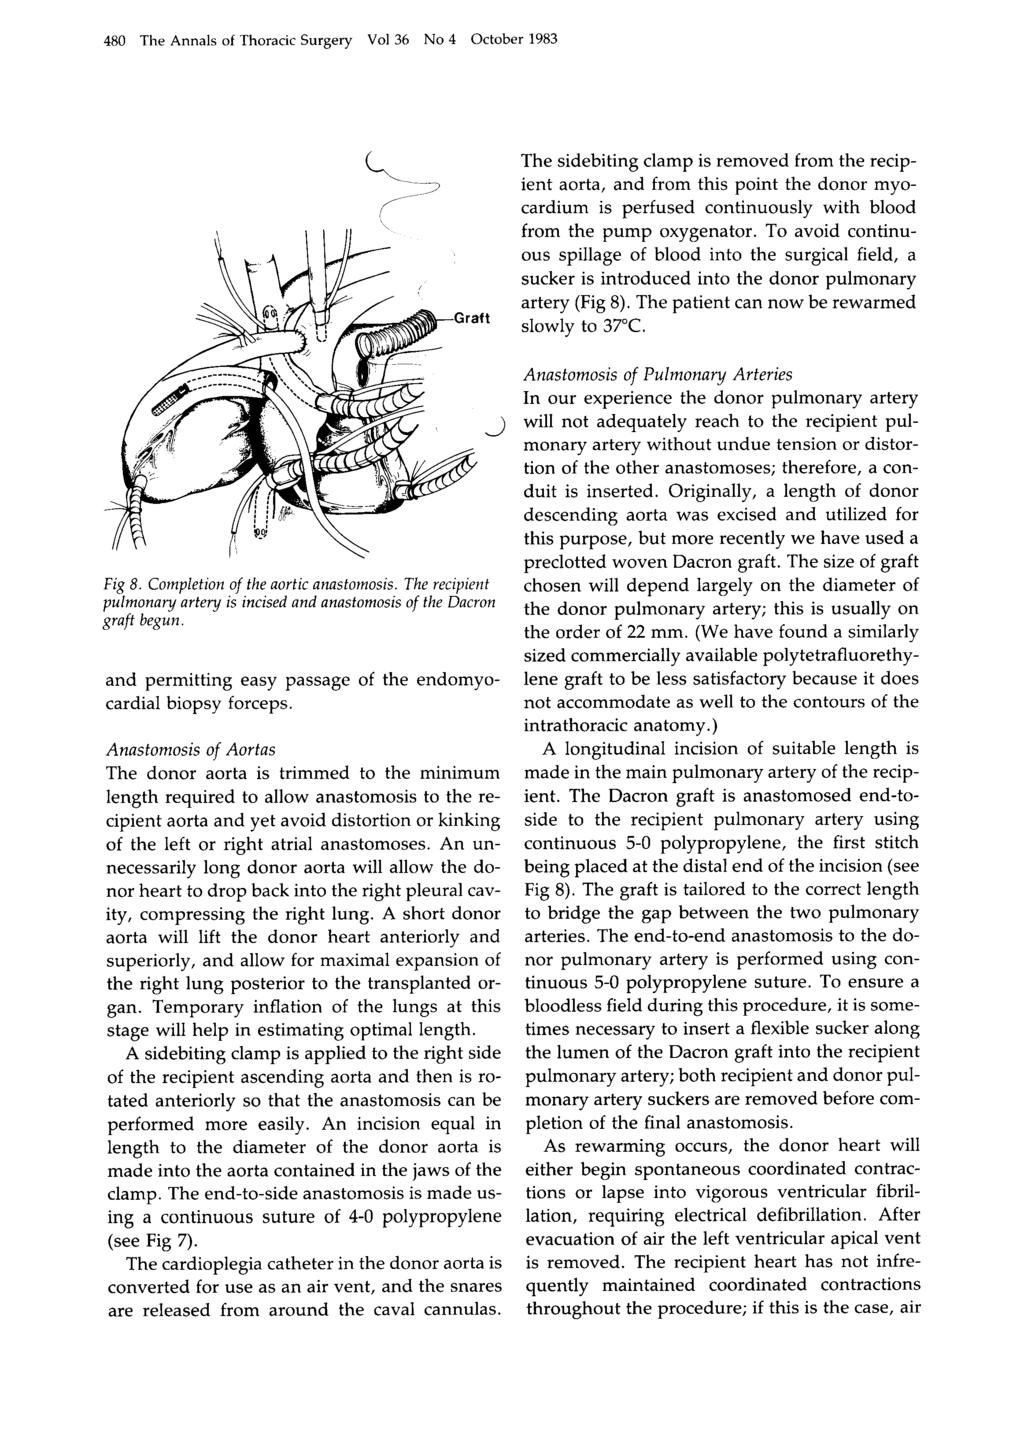 480 The Annals of Thoracic Surgery Vol 36 No 4 October 1983 The sidebiting clamp is removed from the recipient aorta, and from this point the donor myocardium is perfused continuously with blood from